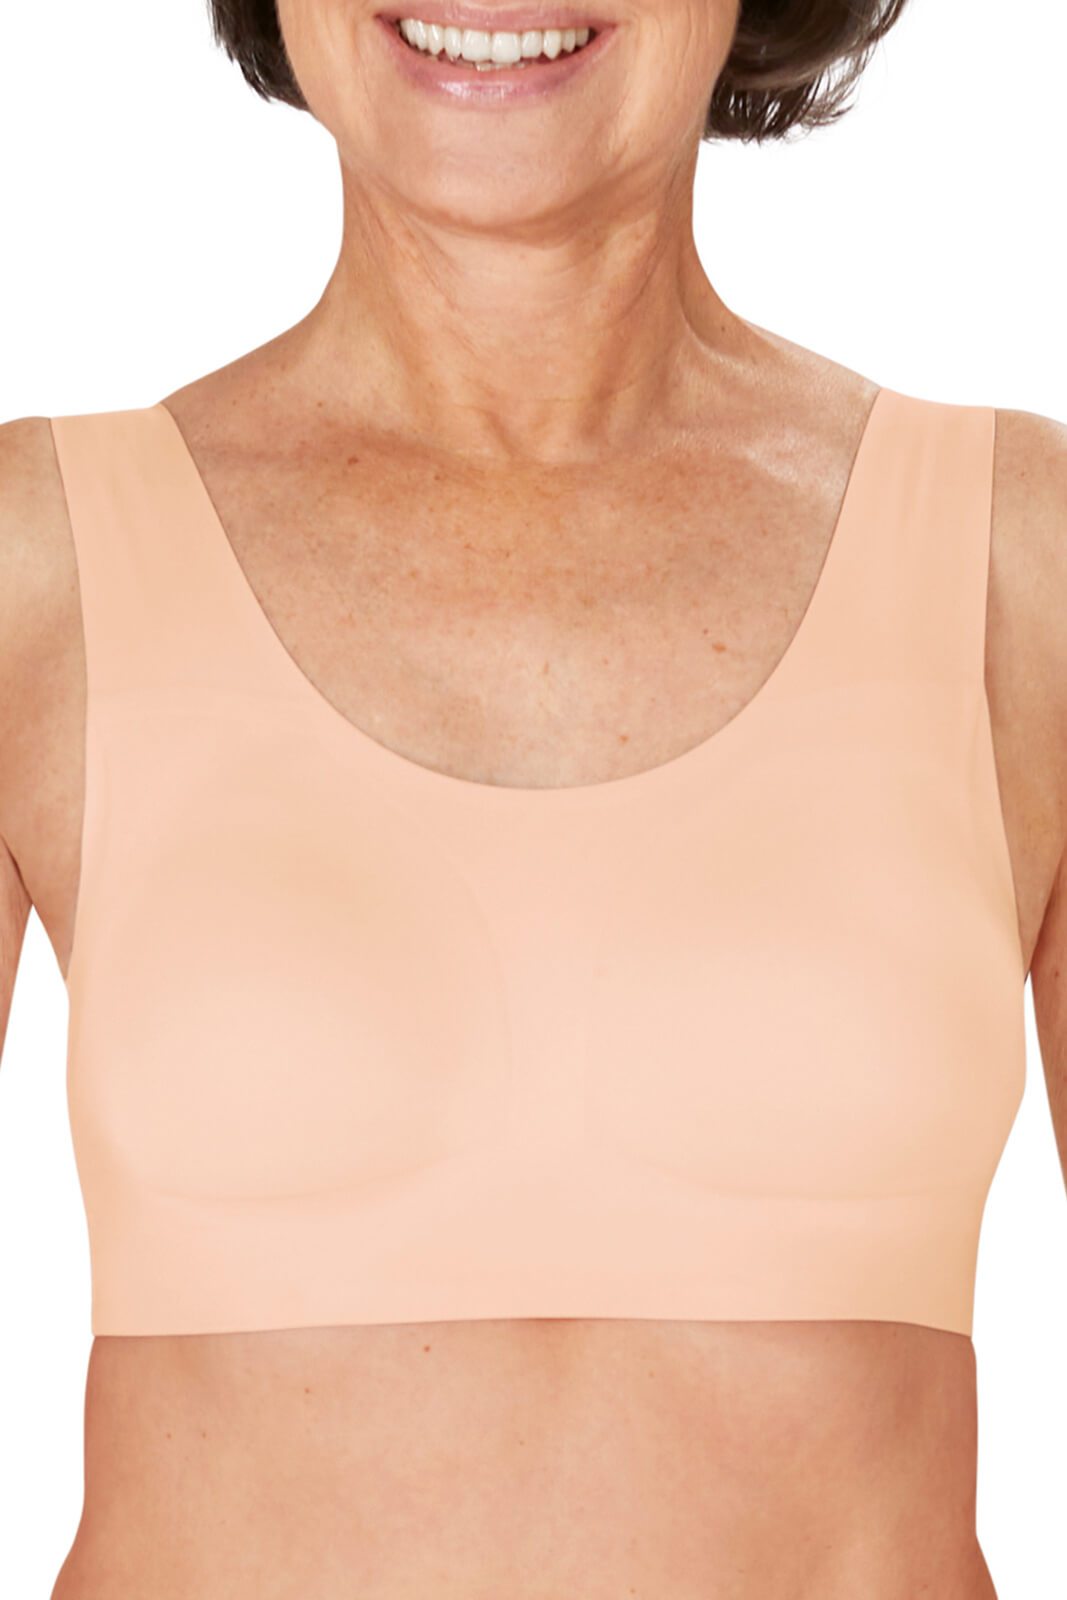 ABC 501 American Breast Care Admire Seamless Cups Wireless Mastectomy NEW